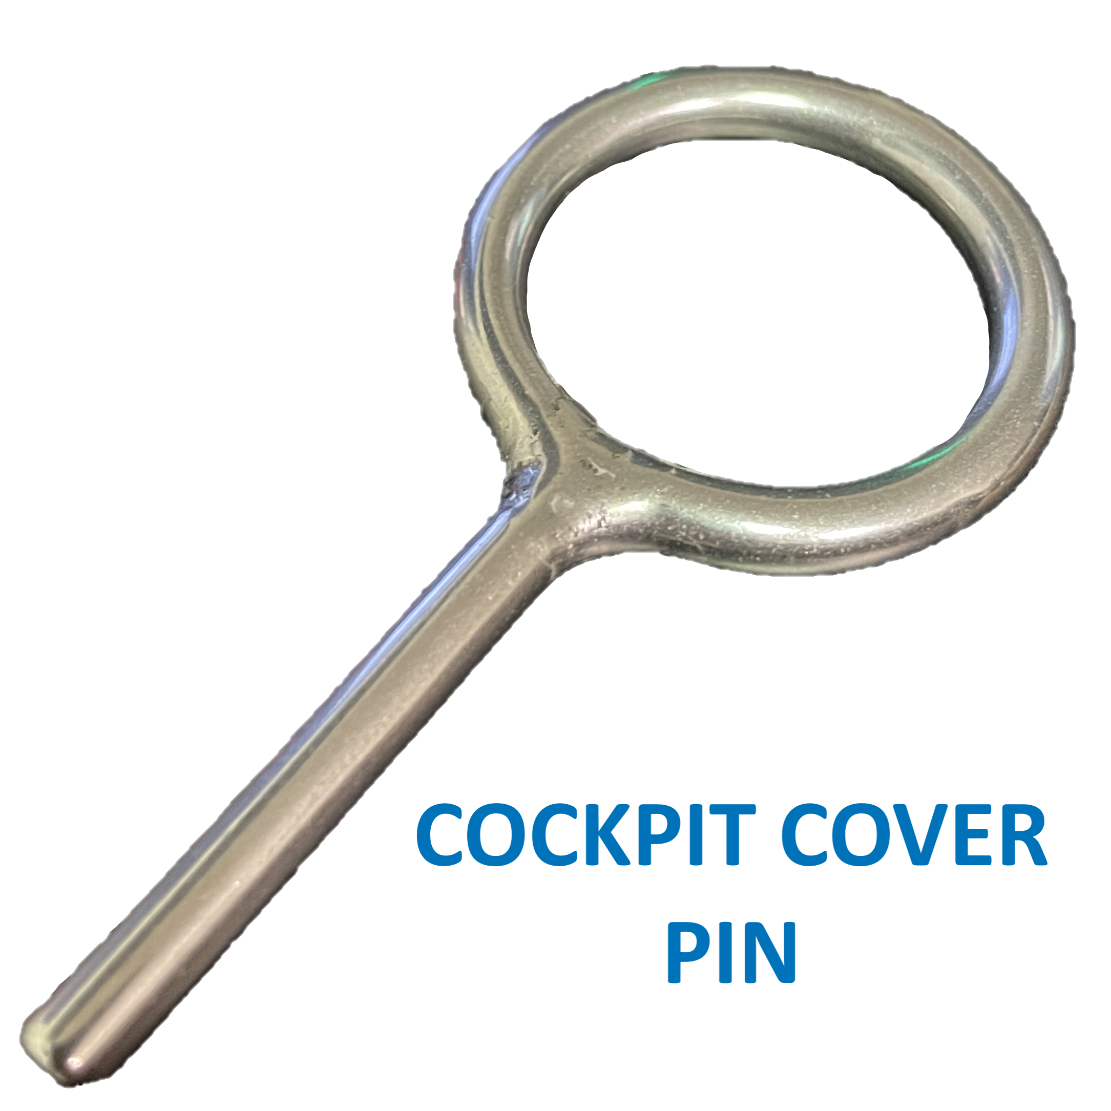 Sportfish stainless Cockpit cover pin (granade pin)